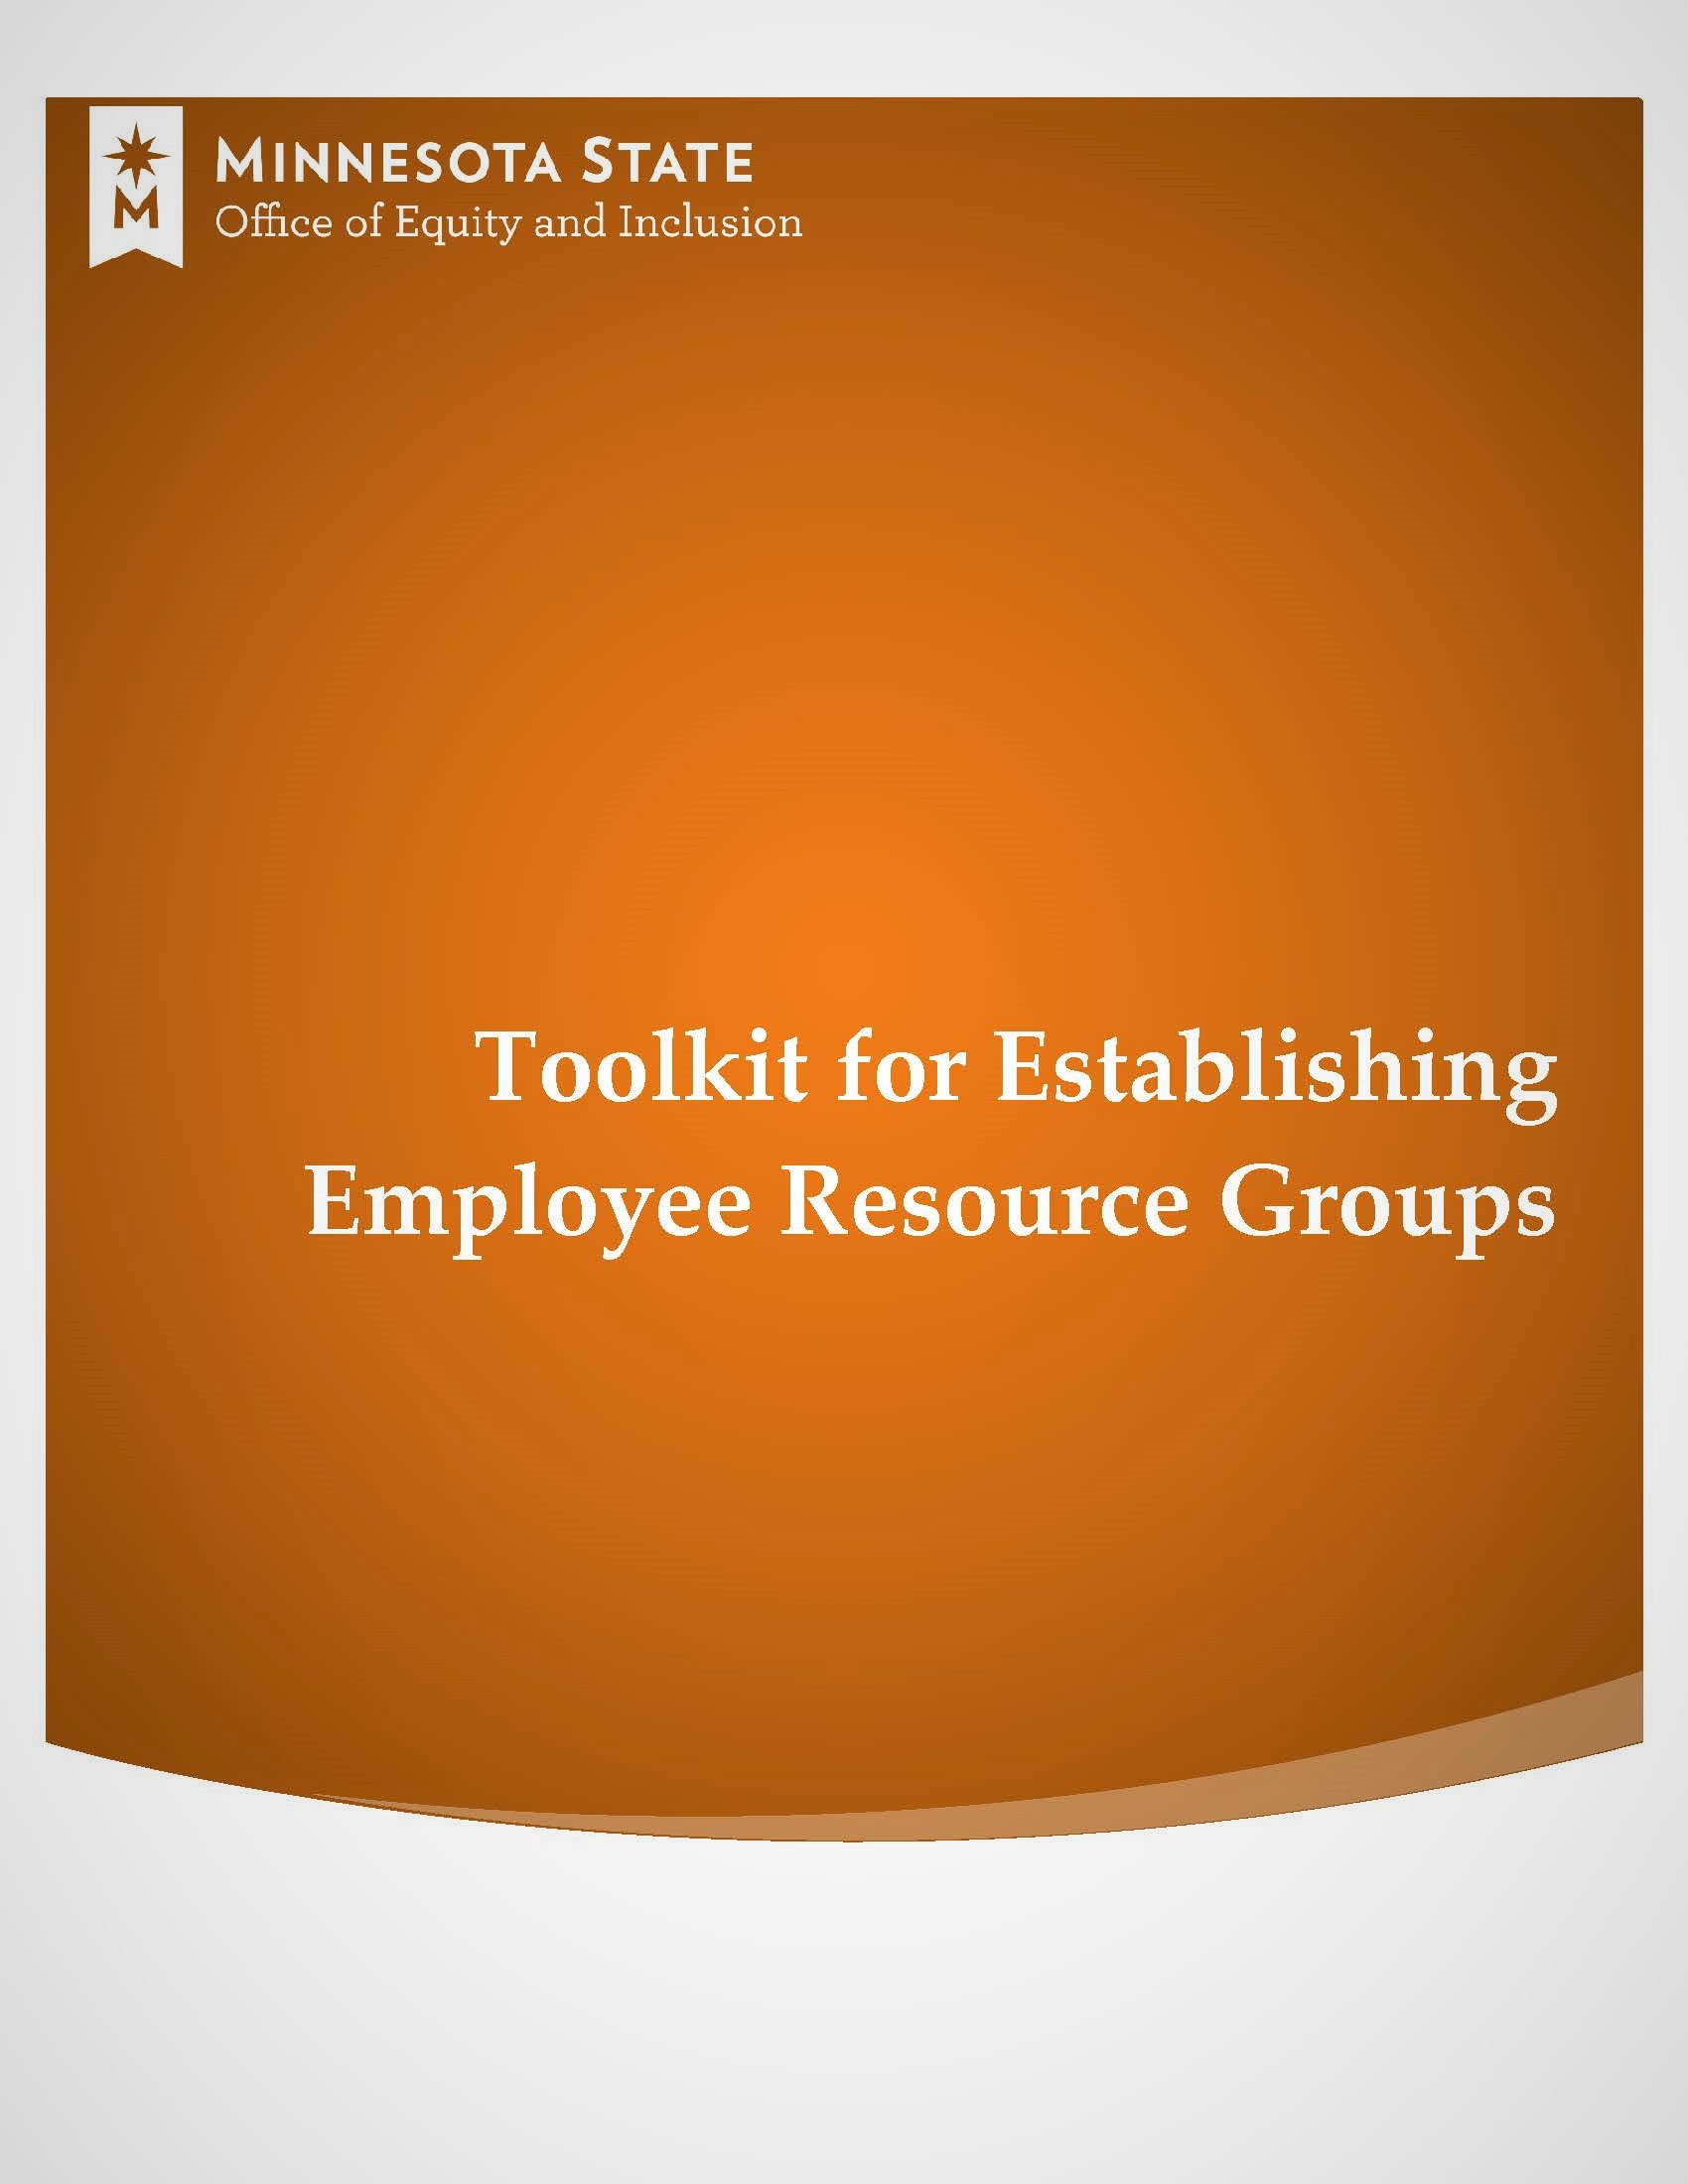 Toolkit document cover